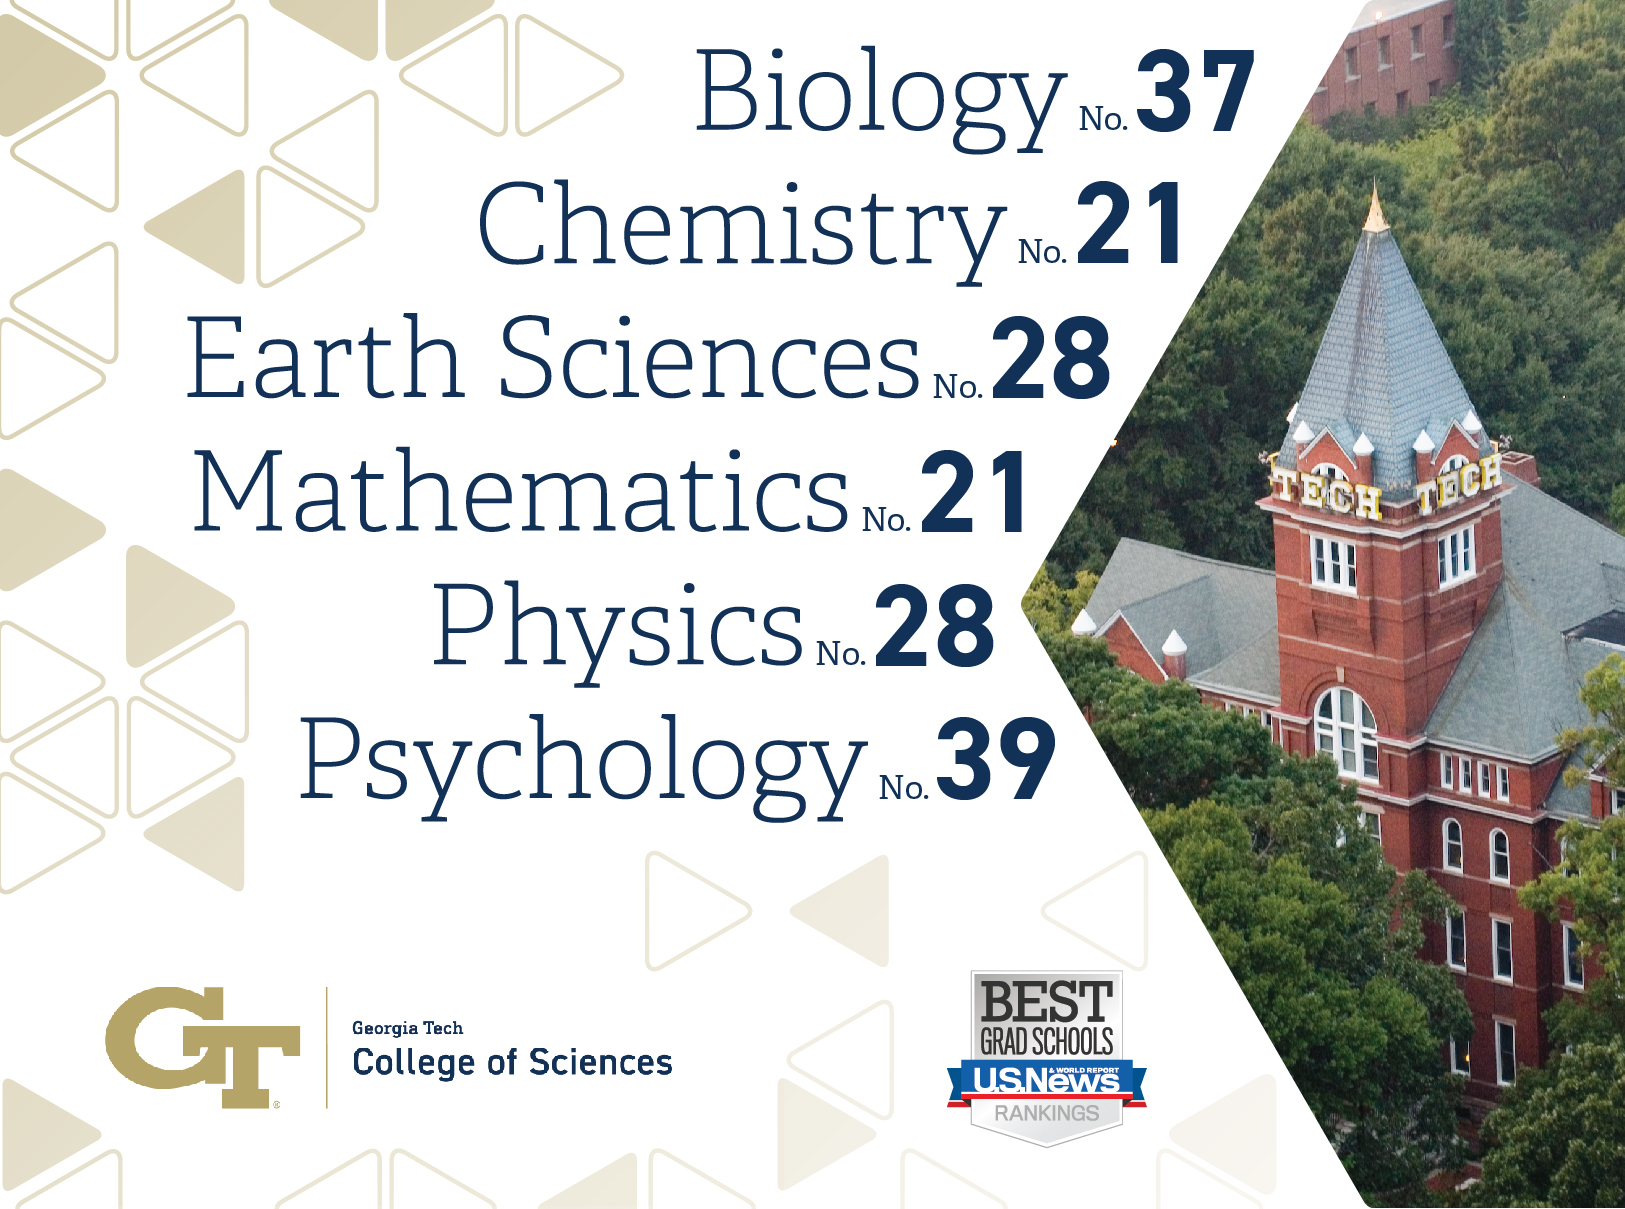 U.S. News ranks all six College of Sciences schools among the best in the nation for graduate studies.